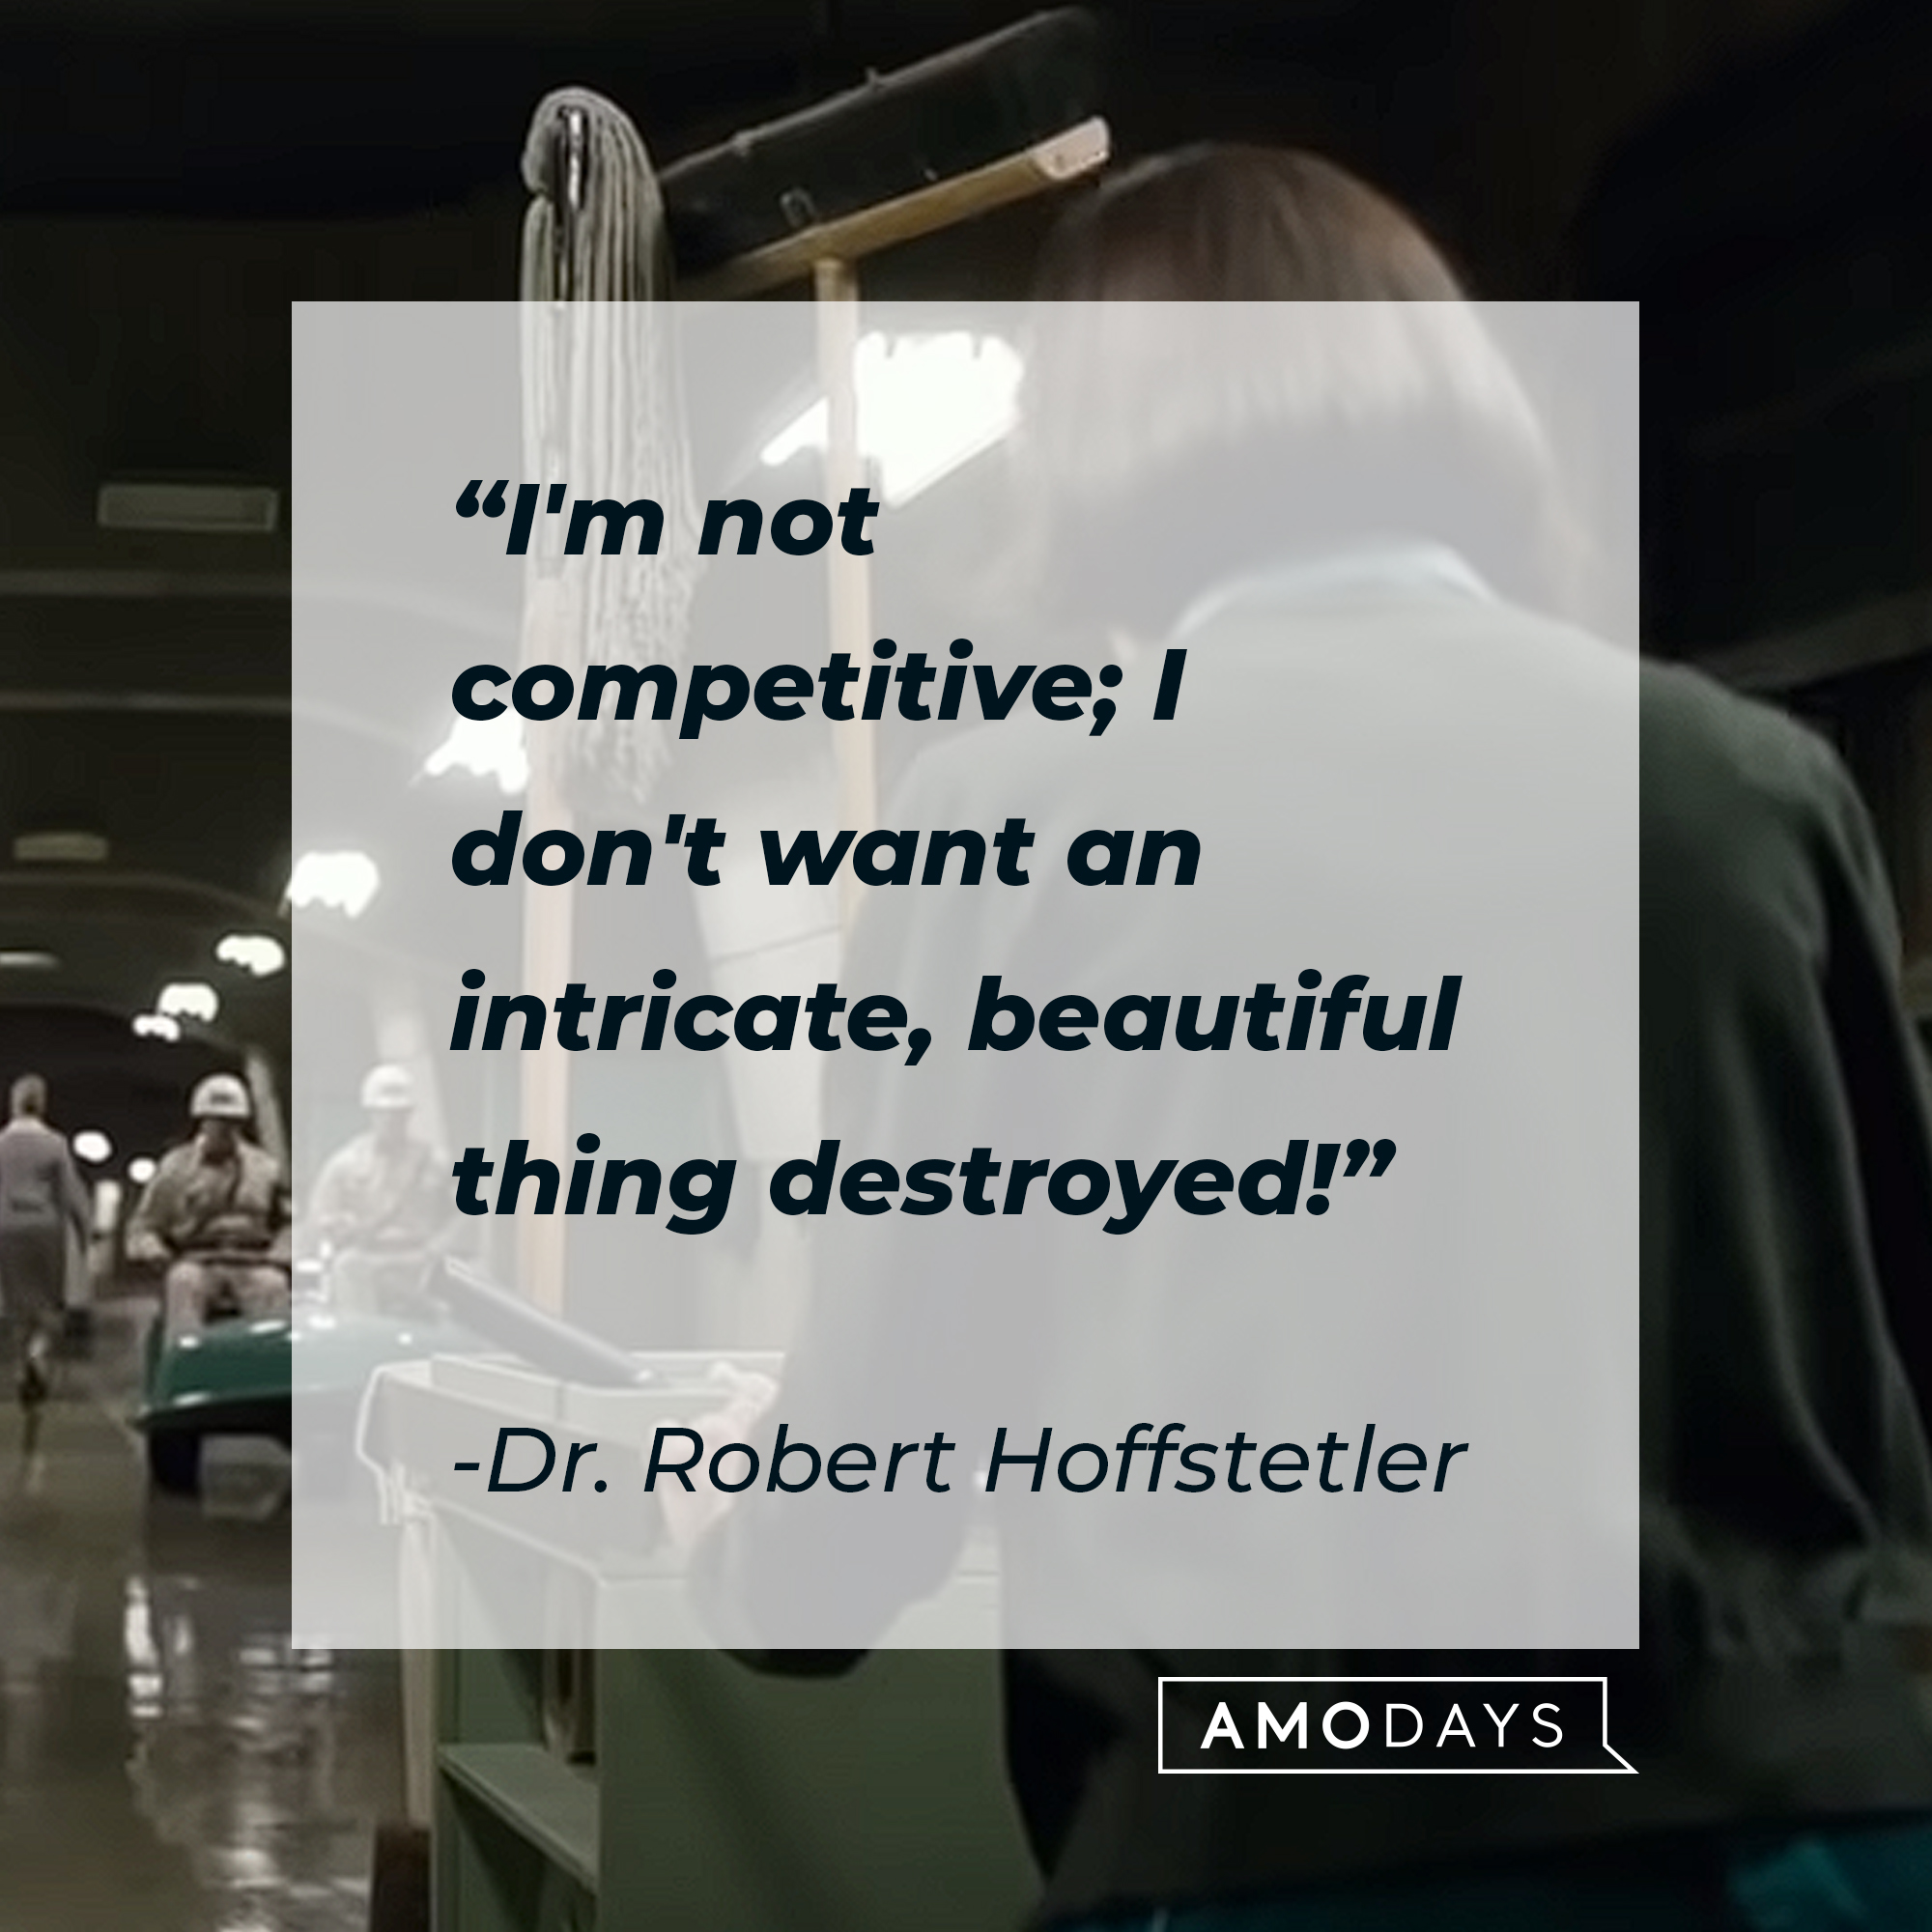 Dr. Robert Hoffstetler's quote : "I'm not competitive, I don't want an intricate, beautiful thing destroyed!" | Source:youtube.com/searchlightpictures